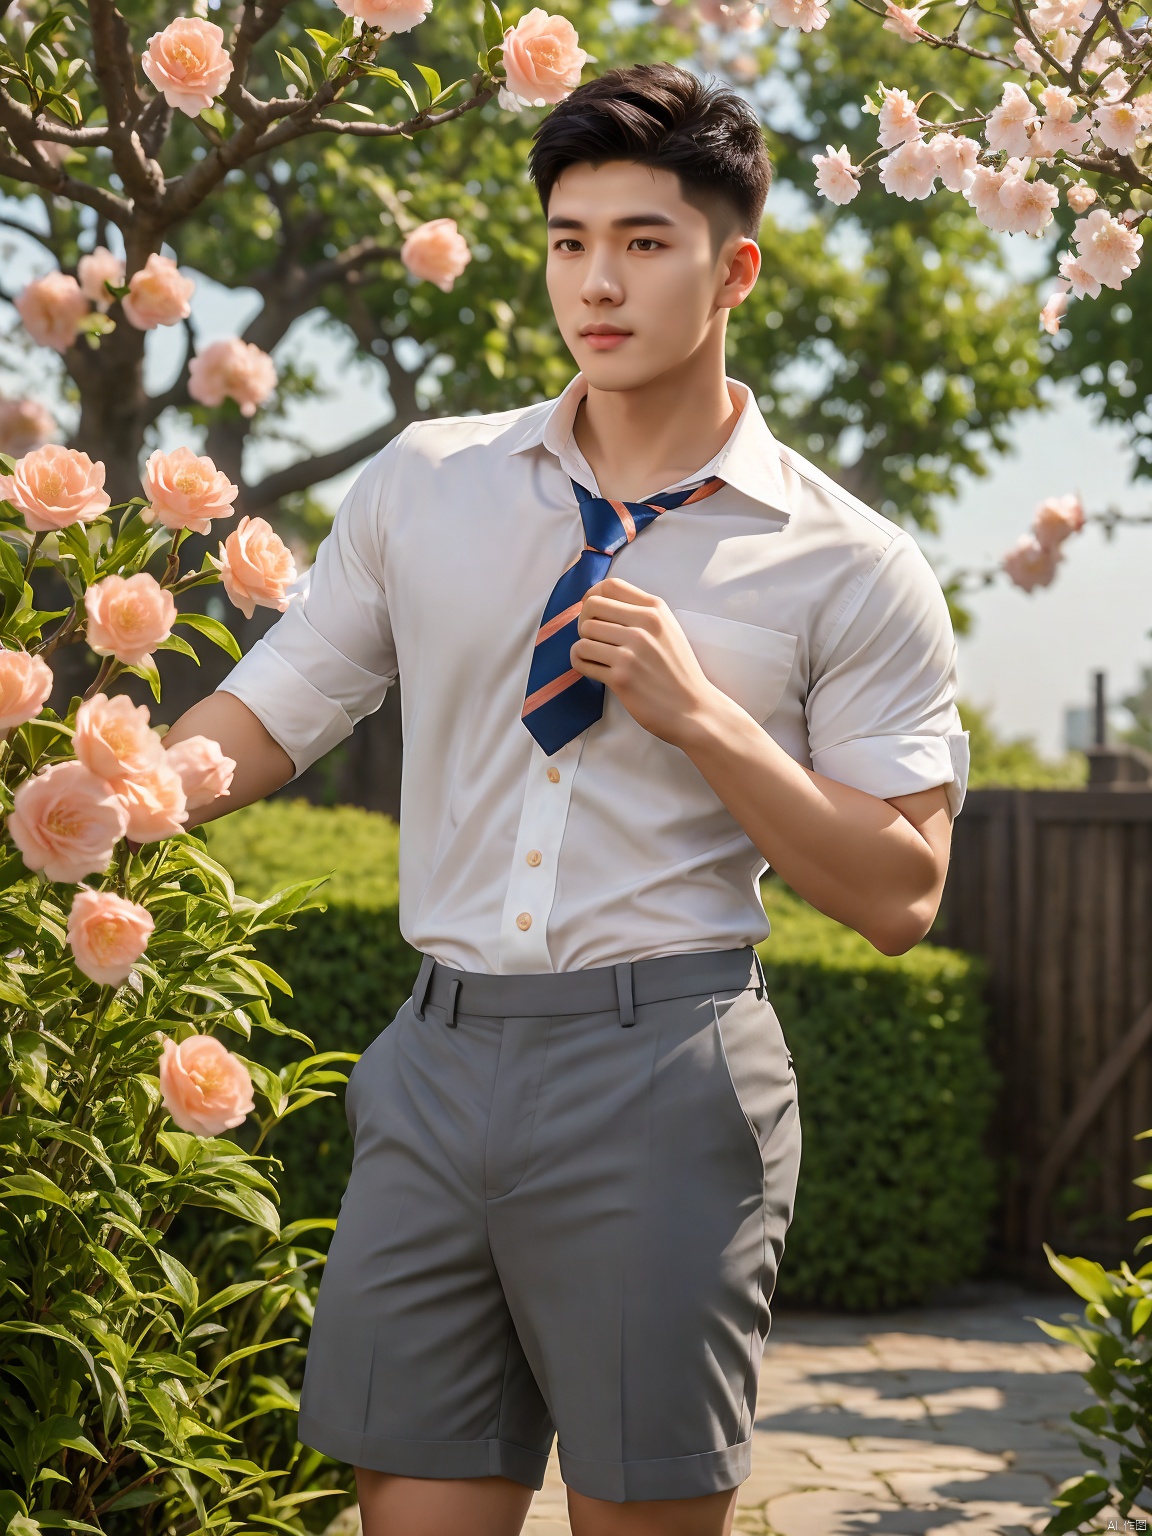  masterpiece,1 boy,Young,Handsome,Look at me,Short hair,Tea hair,Students,White shirt,Striped tie,Gray shorts,Stand,Outdoor,Garden,Peach tree,Flying petals,Light and shadow,HDR,textured skin,super detail,best quality,